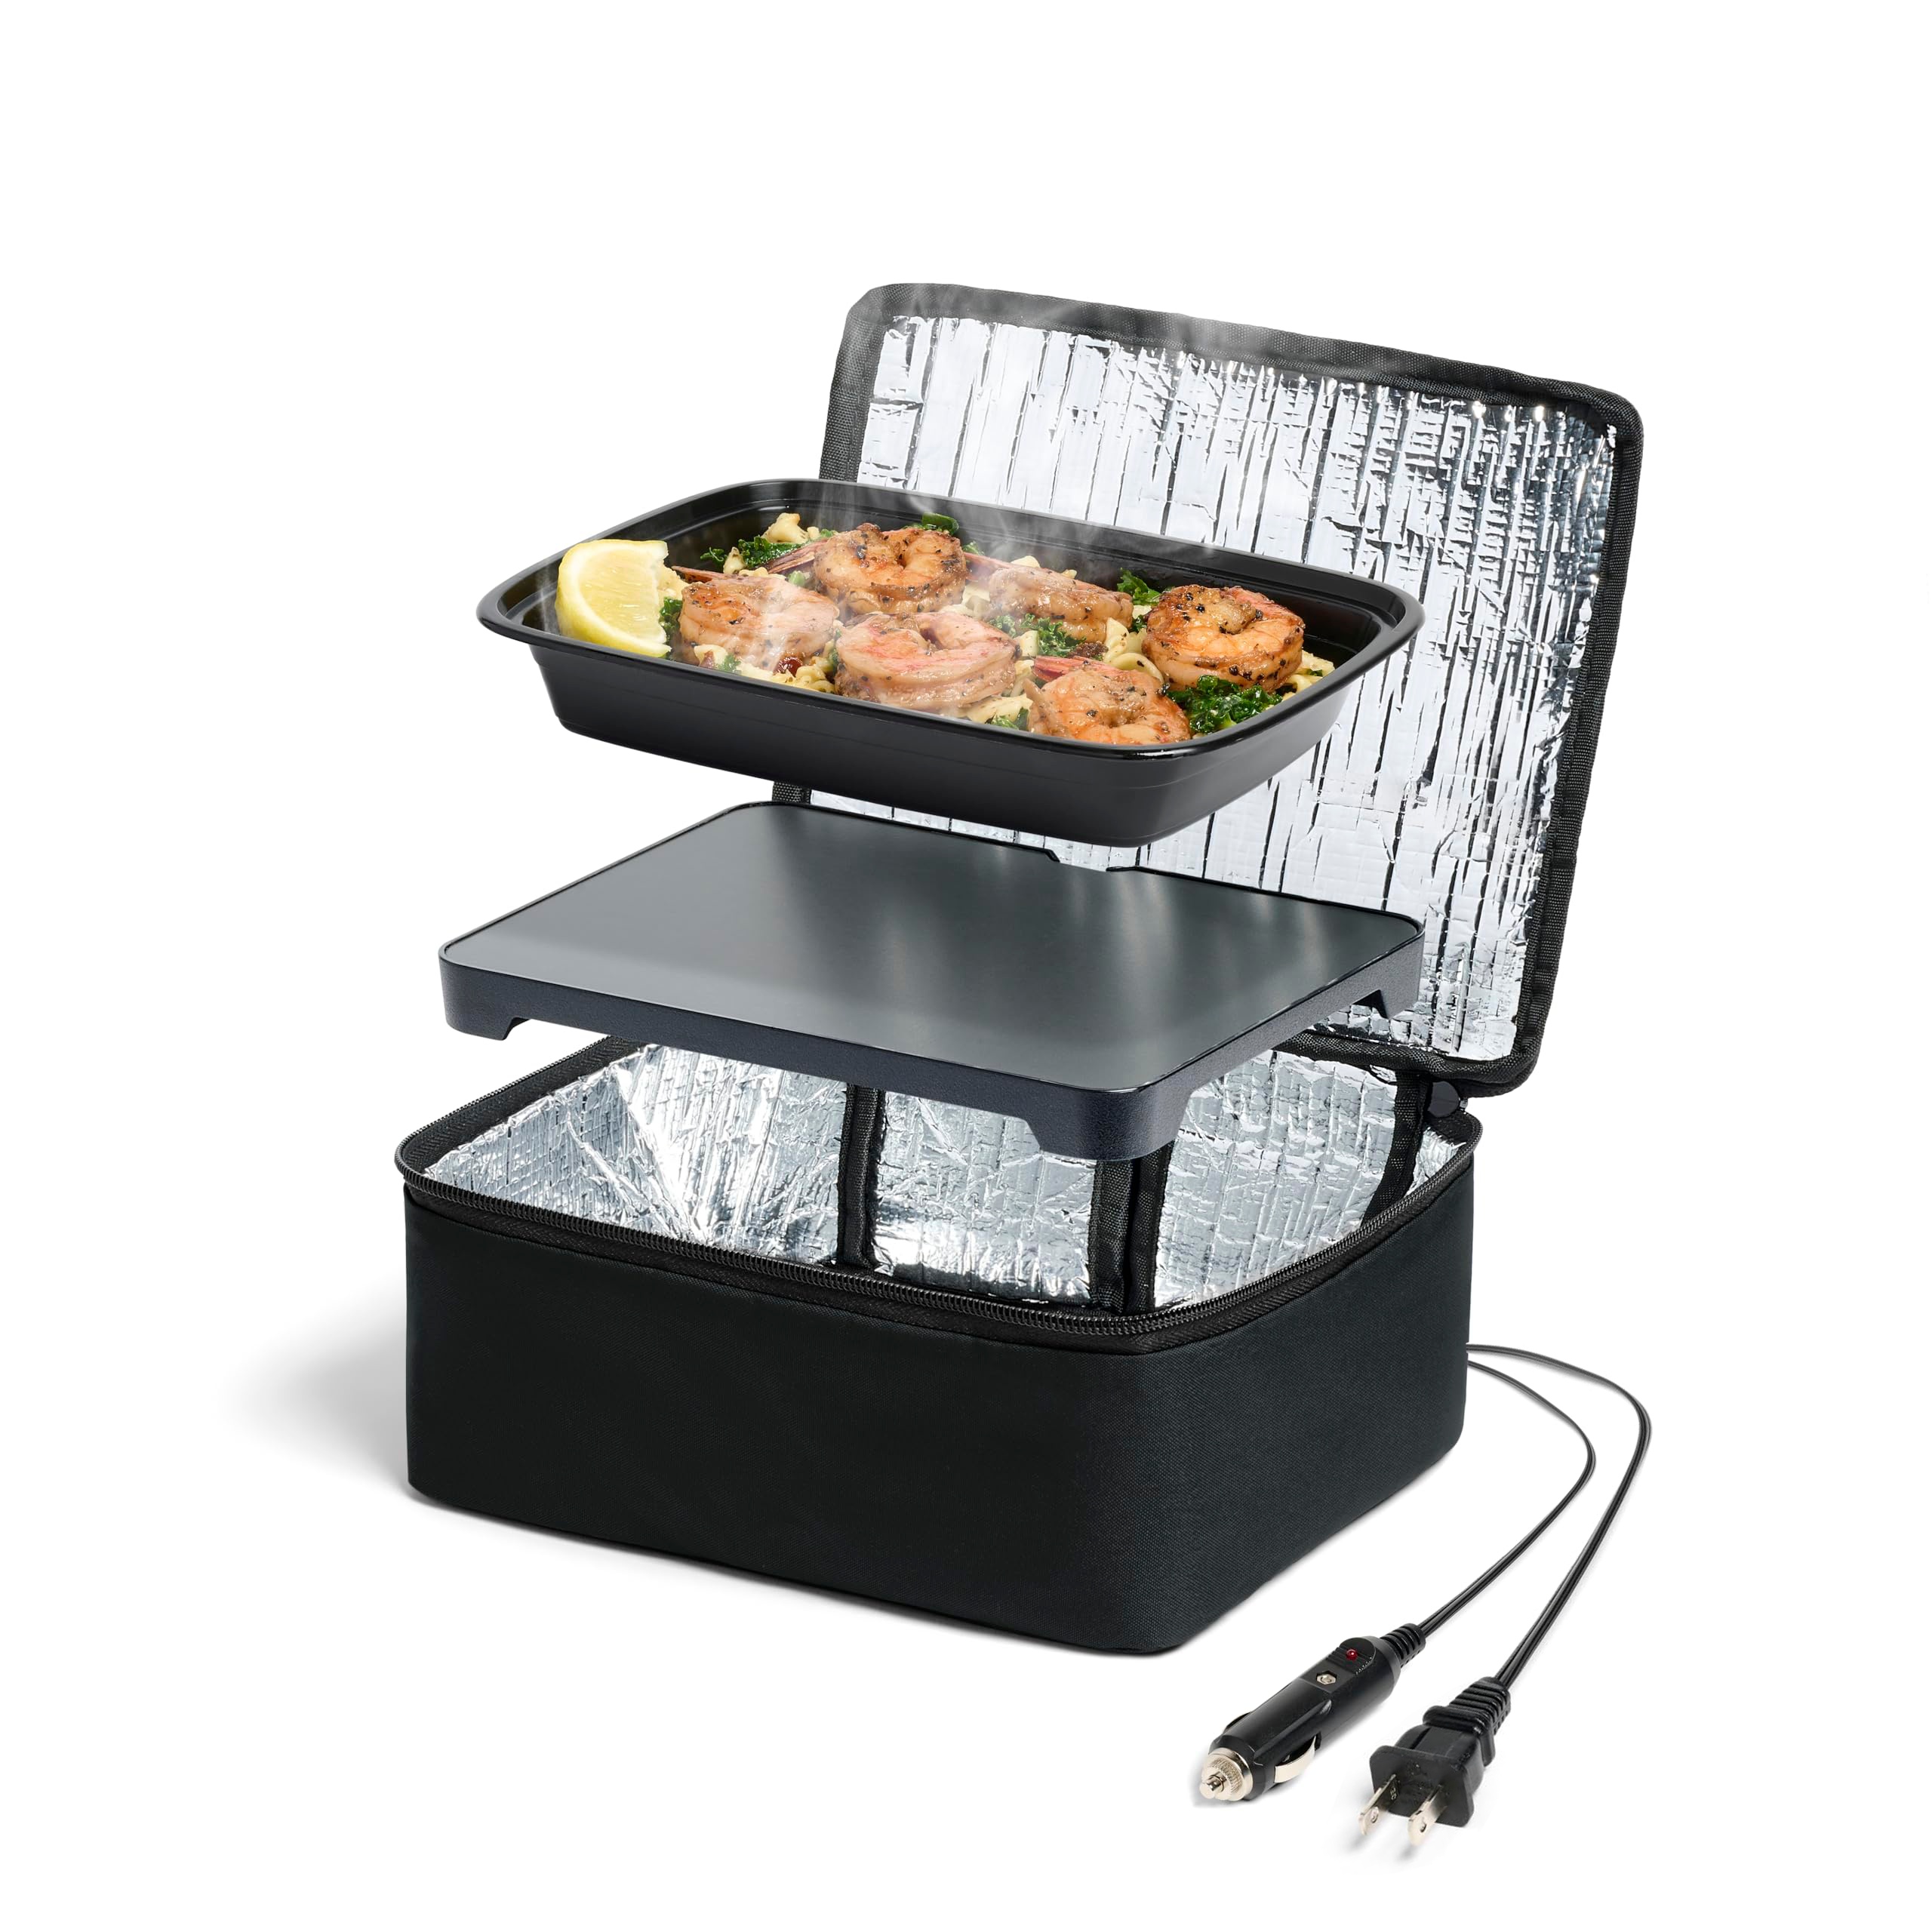 

Portable Oven Lunch Box Food Warmer12v 24v 110v Mini Portable Oven Heated Lunch Box For Reheating And Cooking Meals For Car/ Truck/ Work/ Travel/ Home